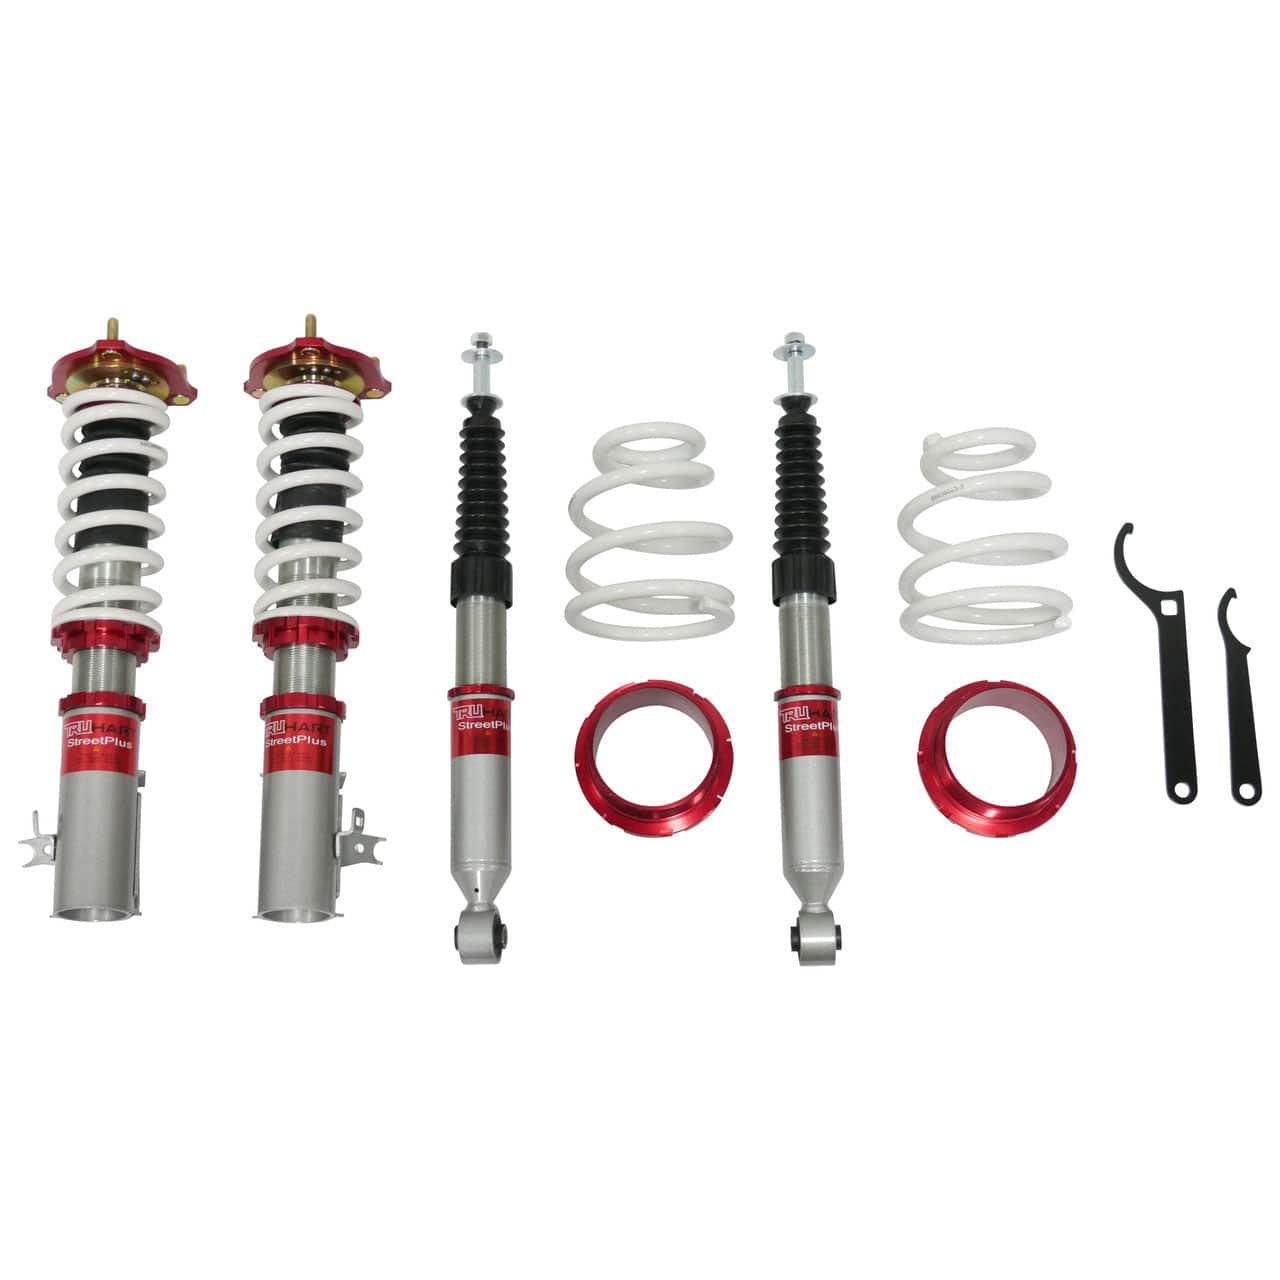 TruHart StreetPlus Coilovers for 2006-2011 Honda Civic TH-H805